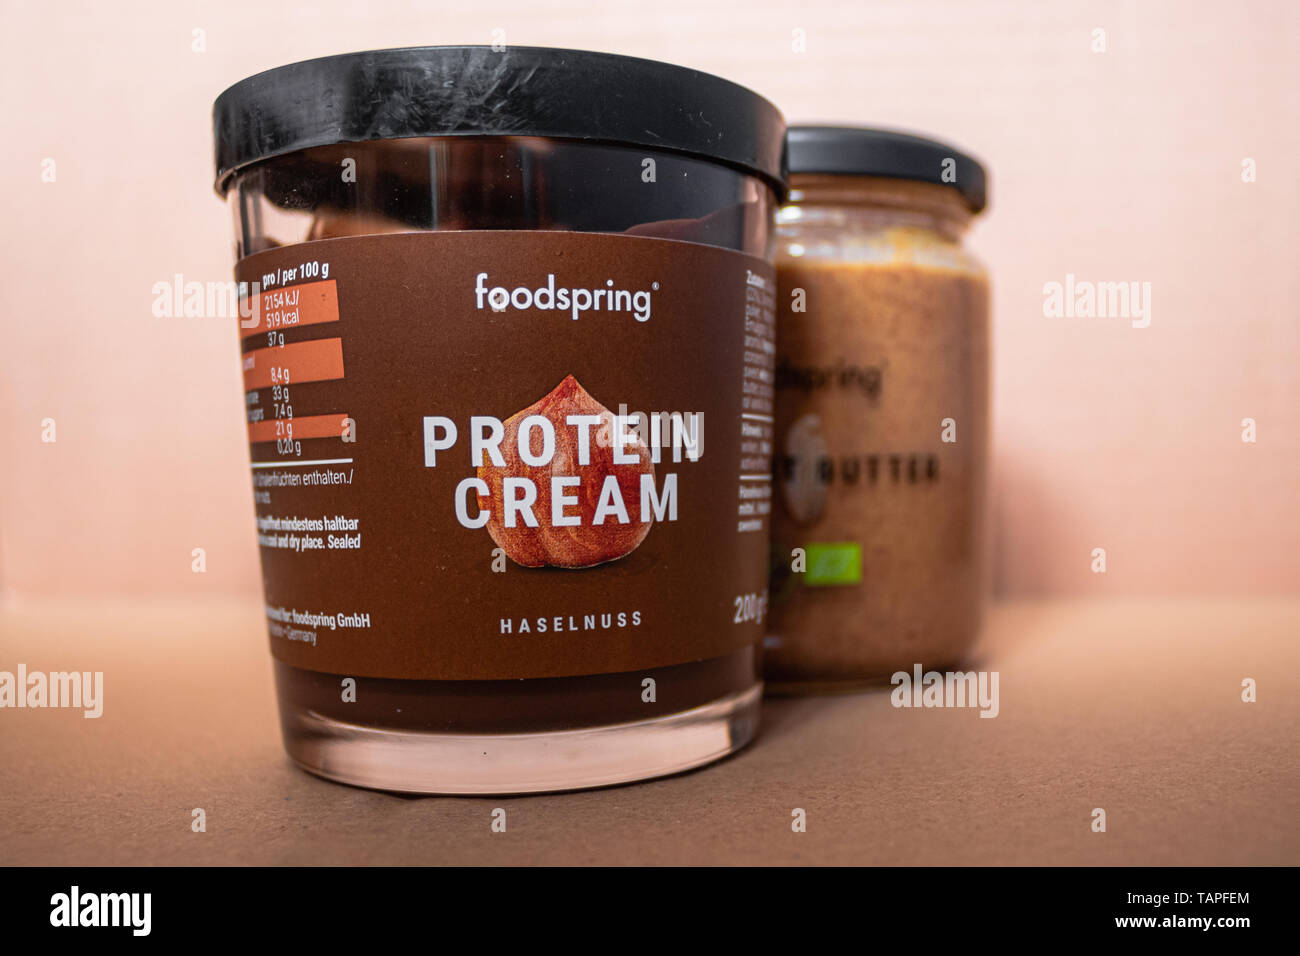 https://c8.alamy.com/comp/TAPFEM/parma-italy-27-may-2019-foodspring-protein-cream-and-peanut-butter-german-organic-brand-TAPFEM.jpg